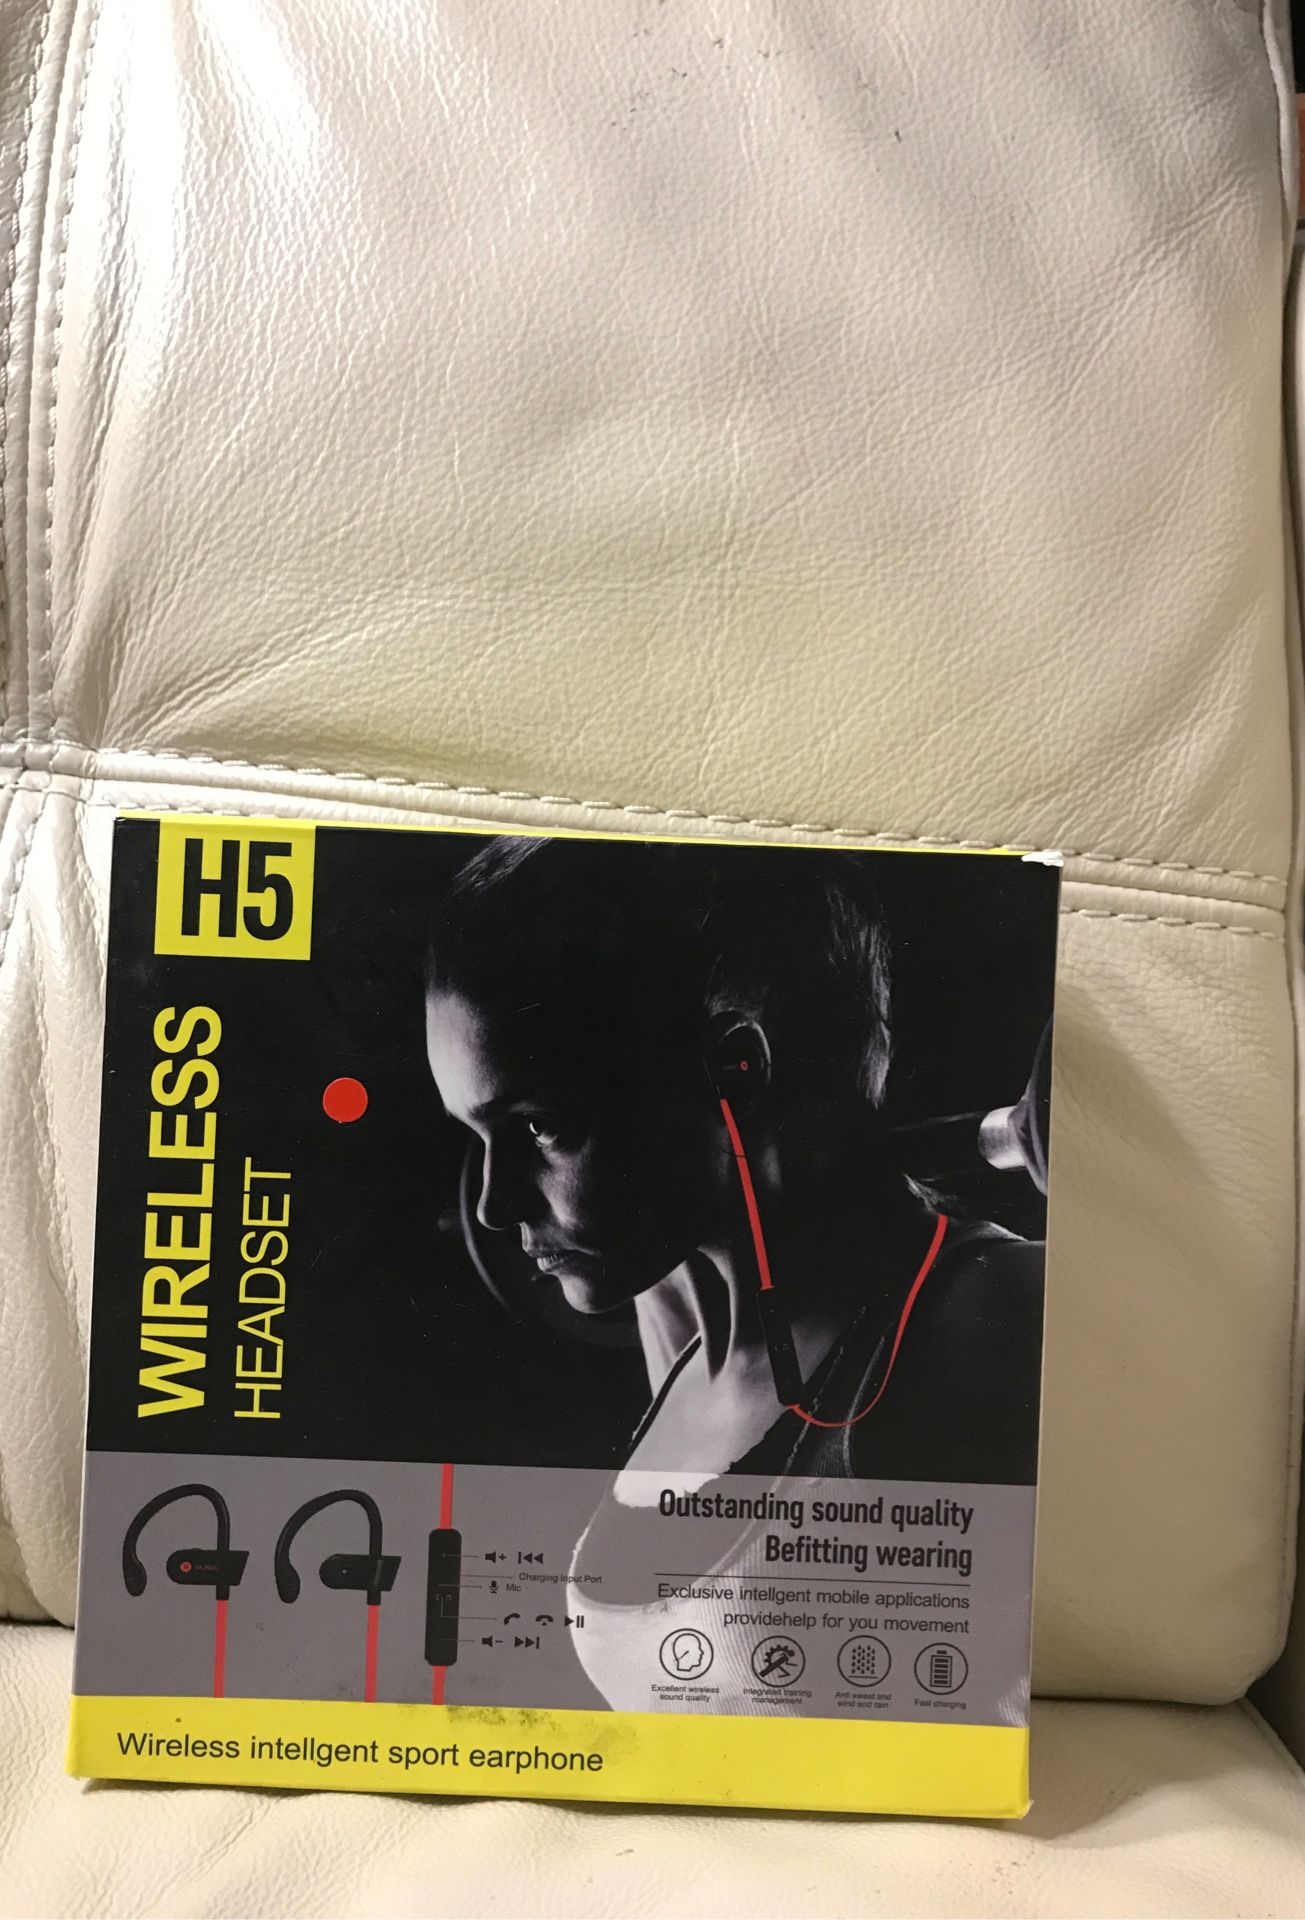 H5 wireless headset for sport